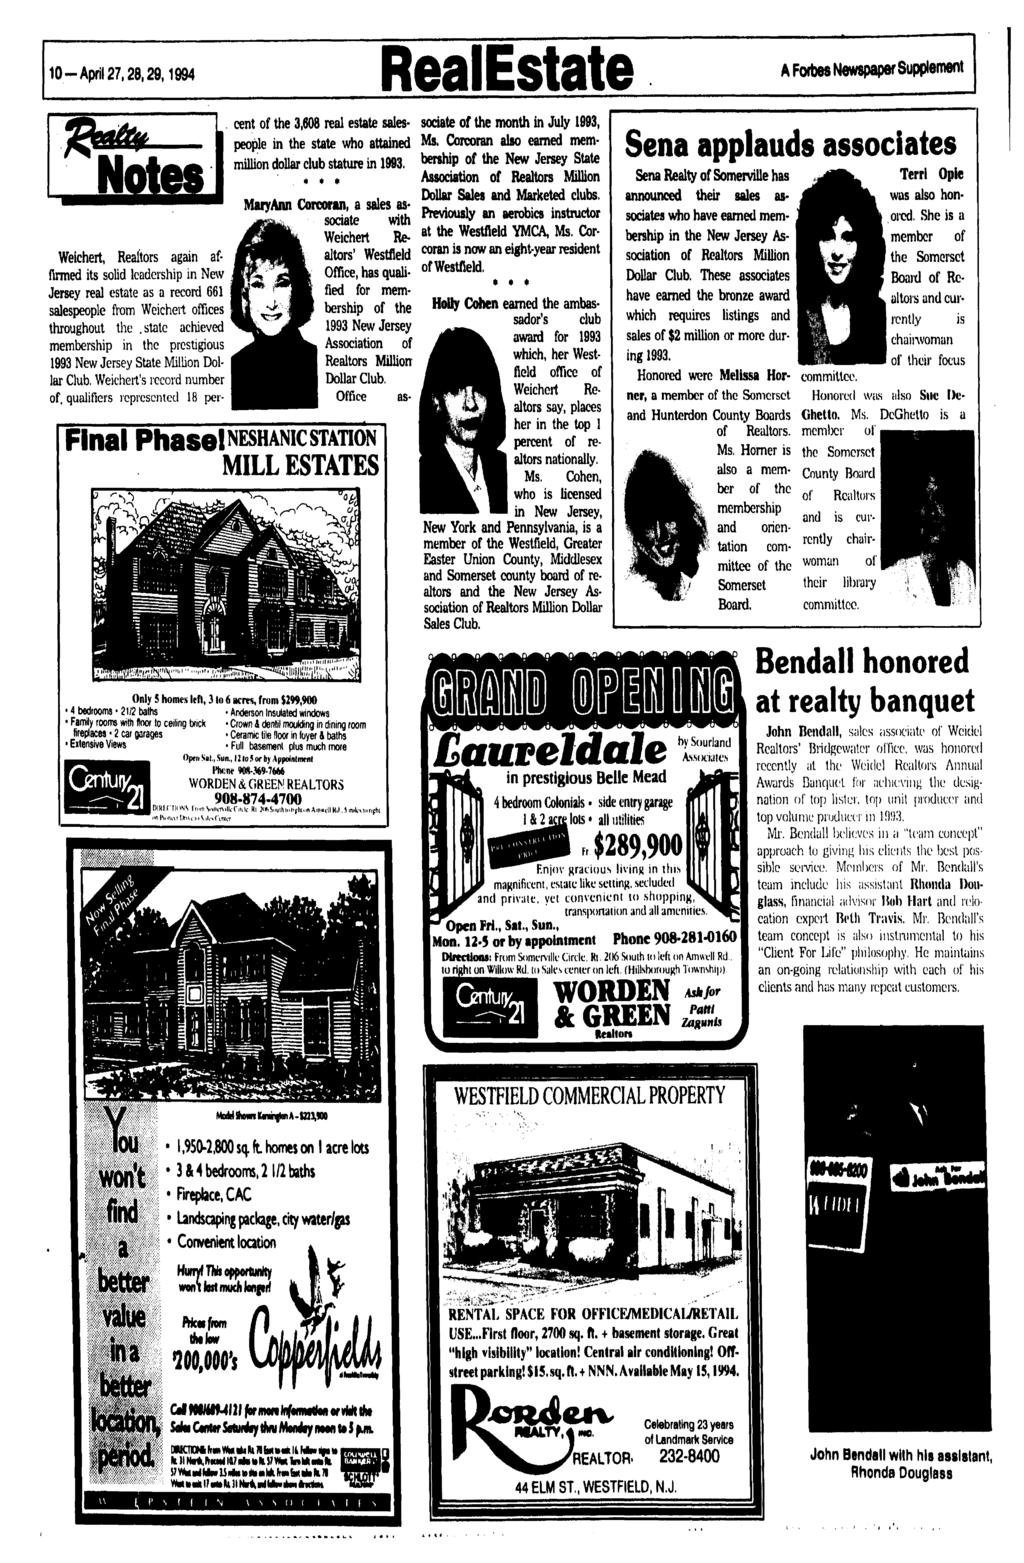 :*>» ;, 10-April 27,28,29,1994 RealEstate A Fwbes Newspaper Supplement Weicheit Realtors again affirmed its solid leadership in New Jersey real estate as a record 661 salespeople from Weichert